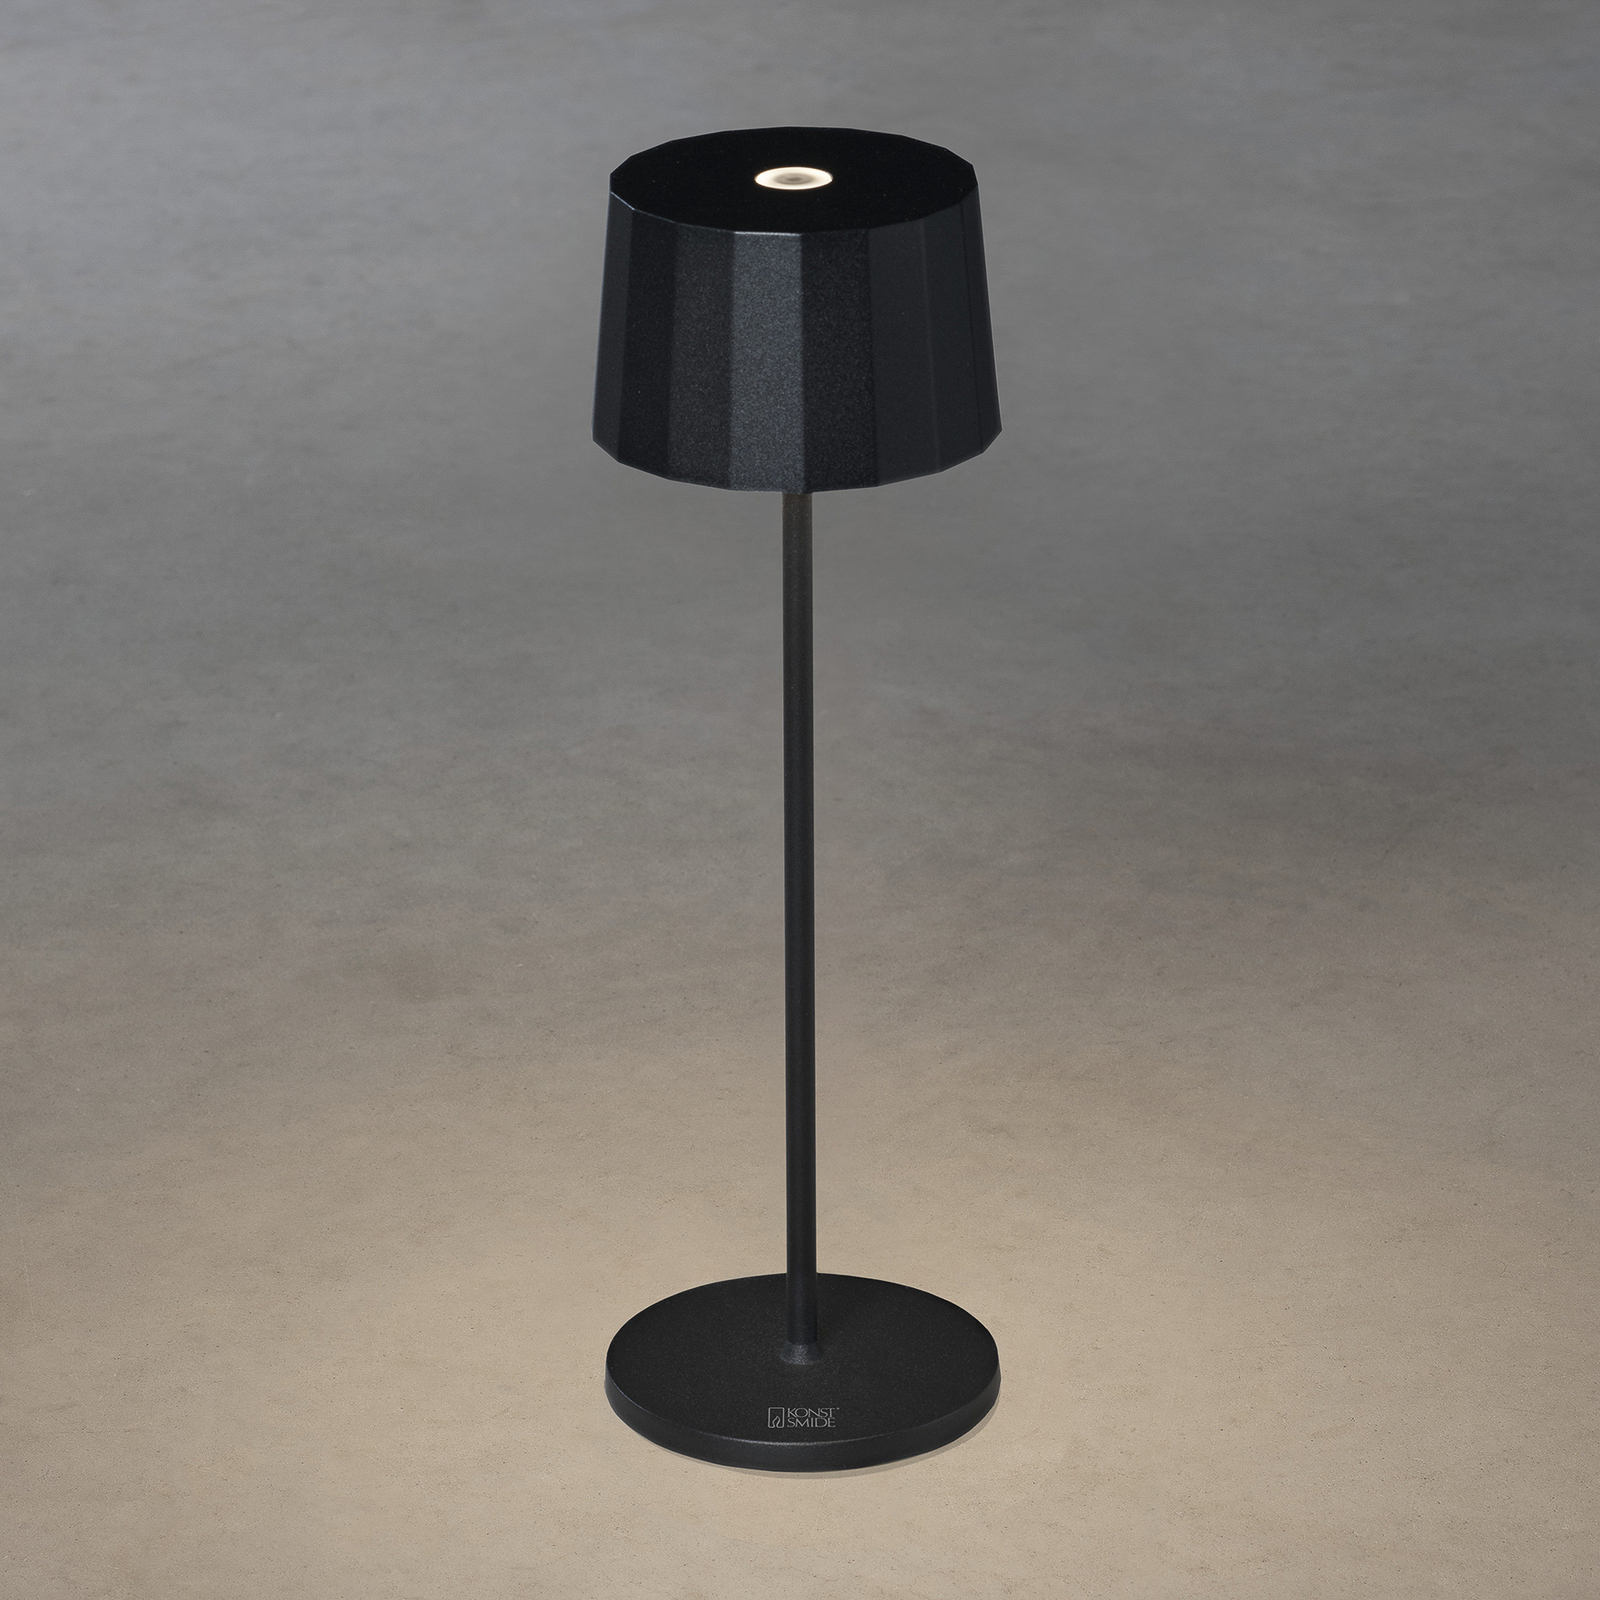 Positano LED table lamp for outdoors, black